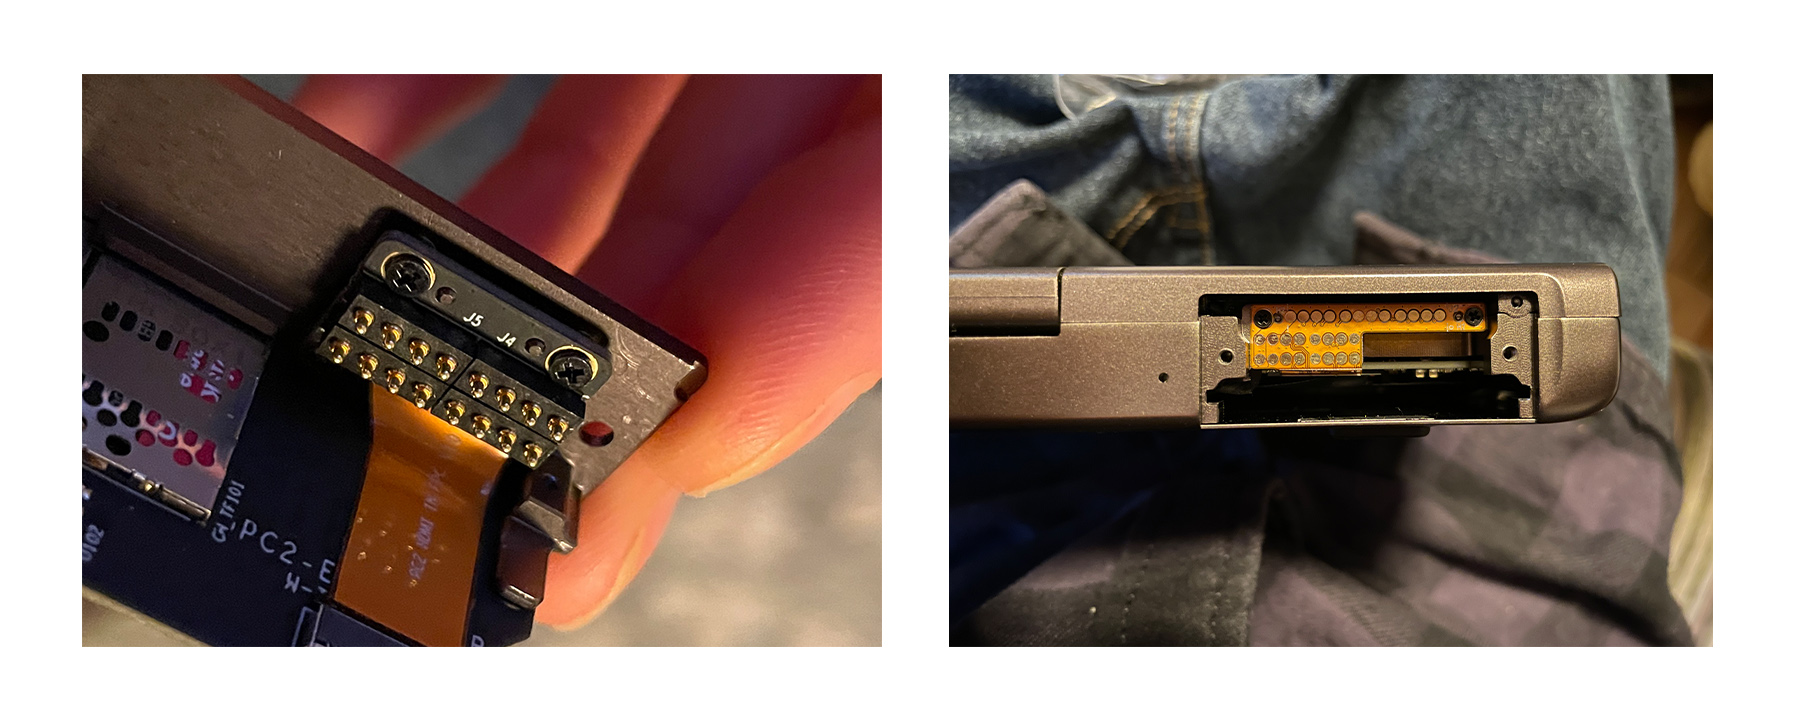 The pogo pin connectors on a stock module, and their counterpart pads on the flat-flex connector of the GPD Pocket 3